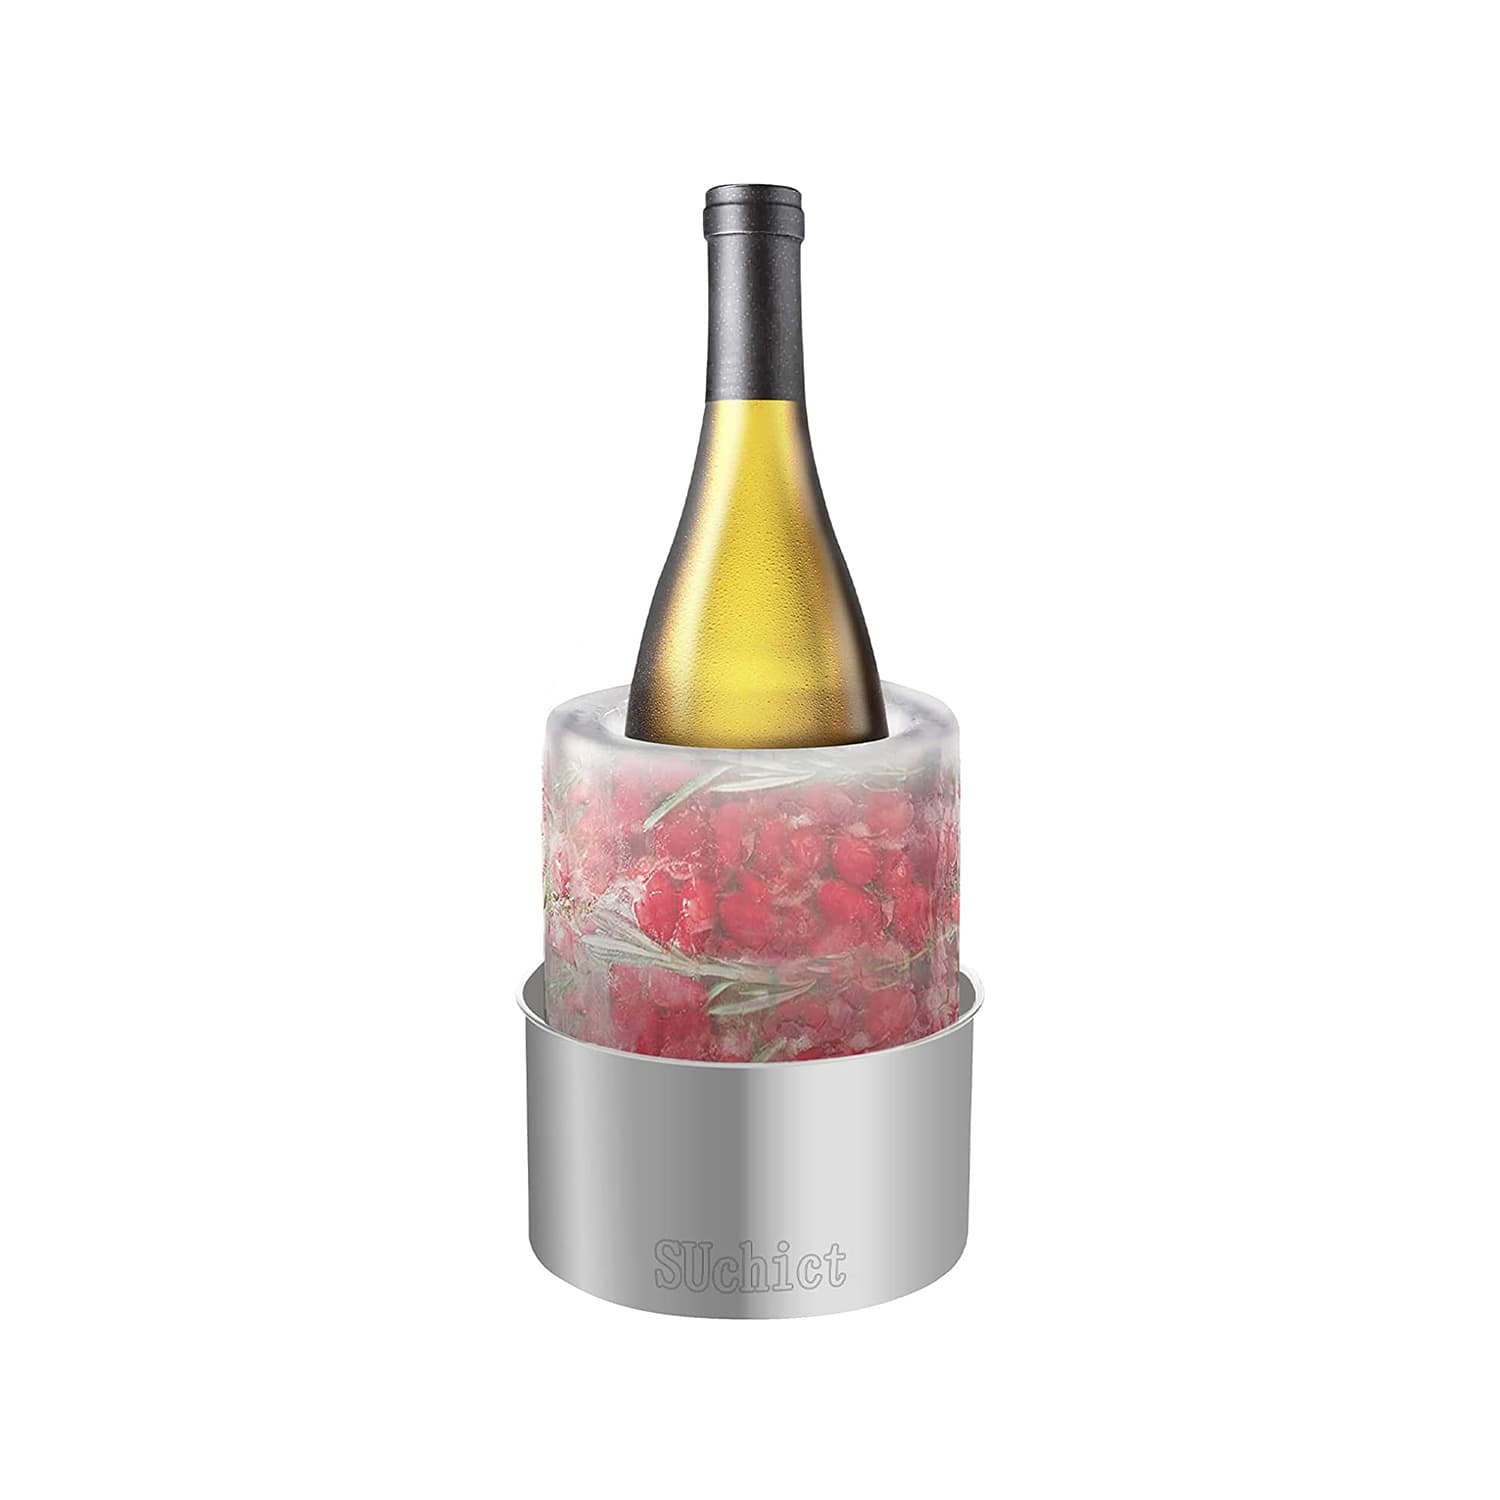 https://cdn.apartmenttherapy.info/image/upload/v1681316648/k/Edit/kitchn-products/ice-mold-wine-chiller-champagne-bucket.jpg